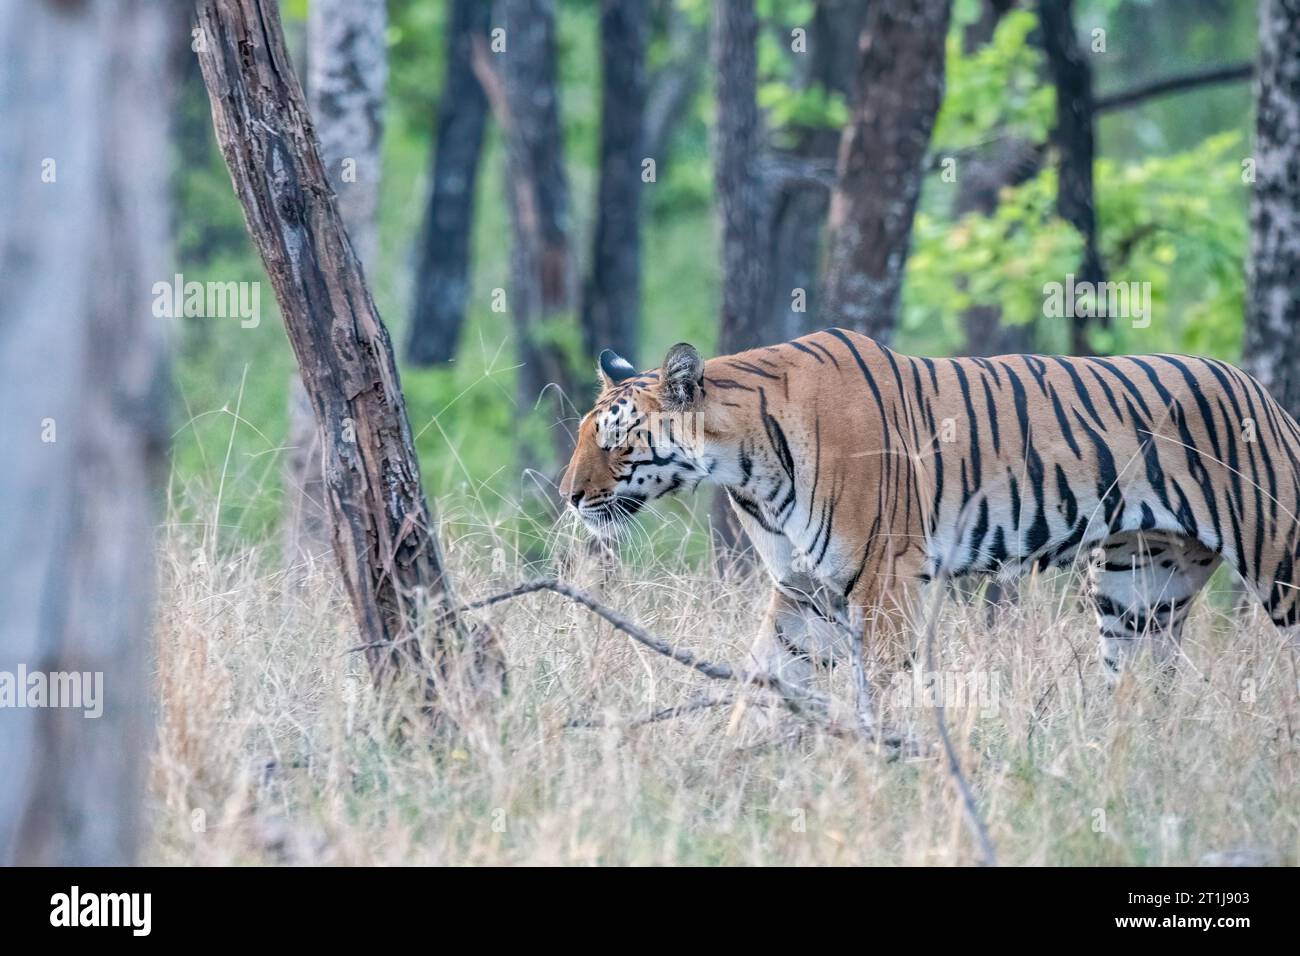 A dominant tigress exploring its territory by crossing the safari track on a hot summer afternoon inside the jungles of Pench National Park Stock Photo